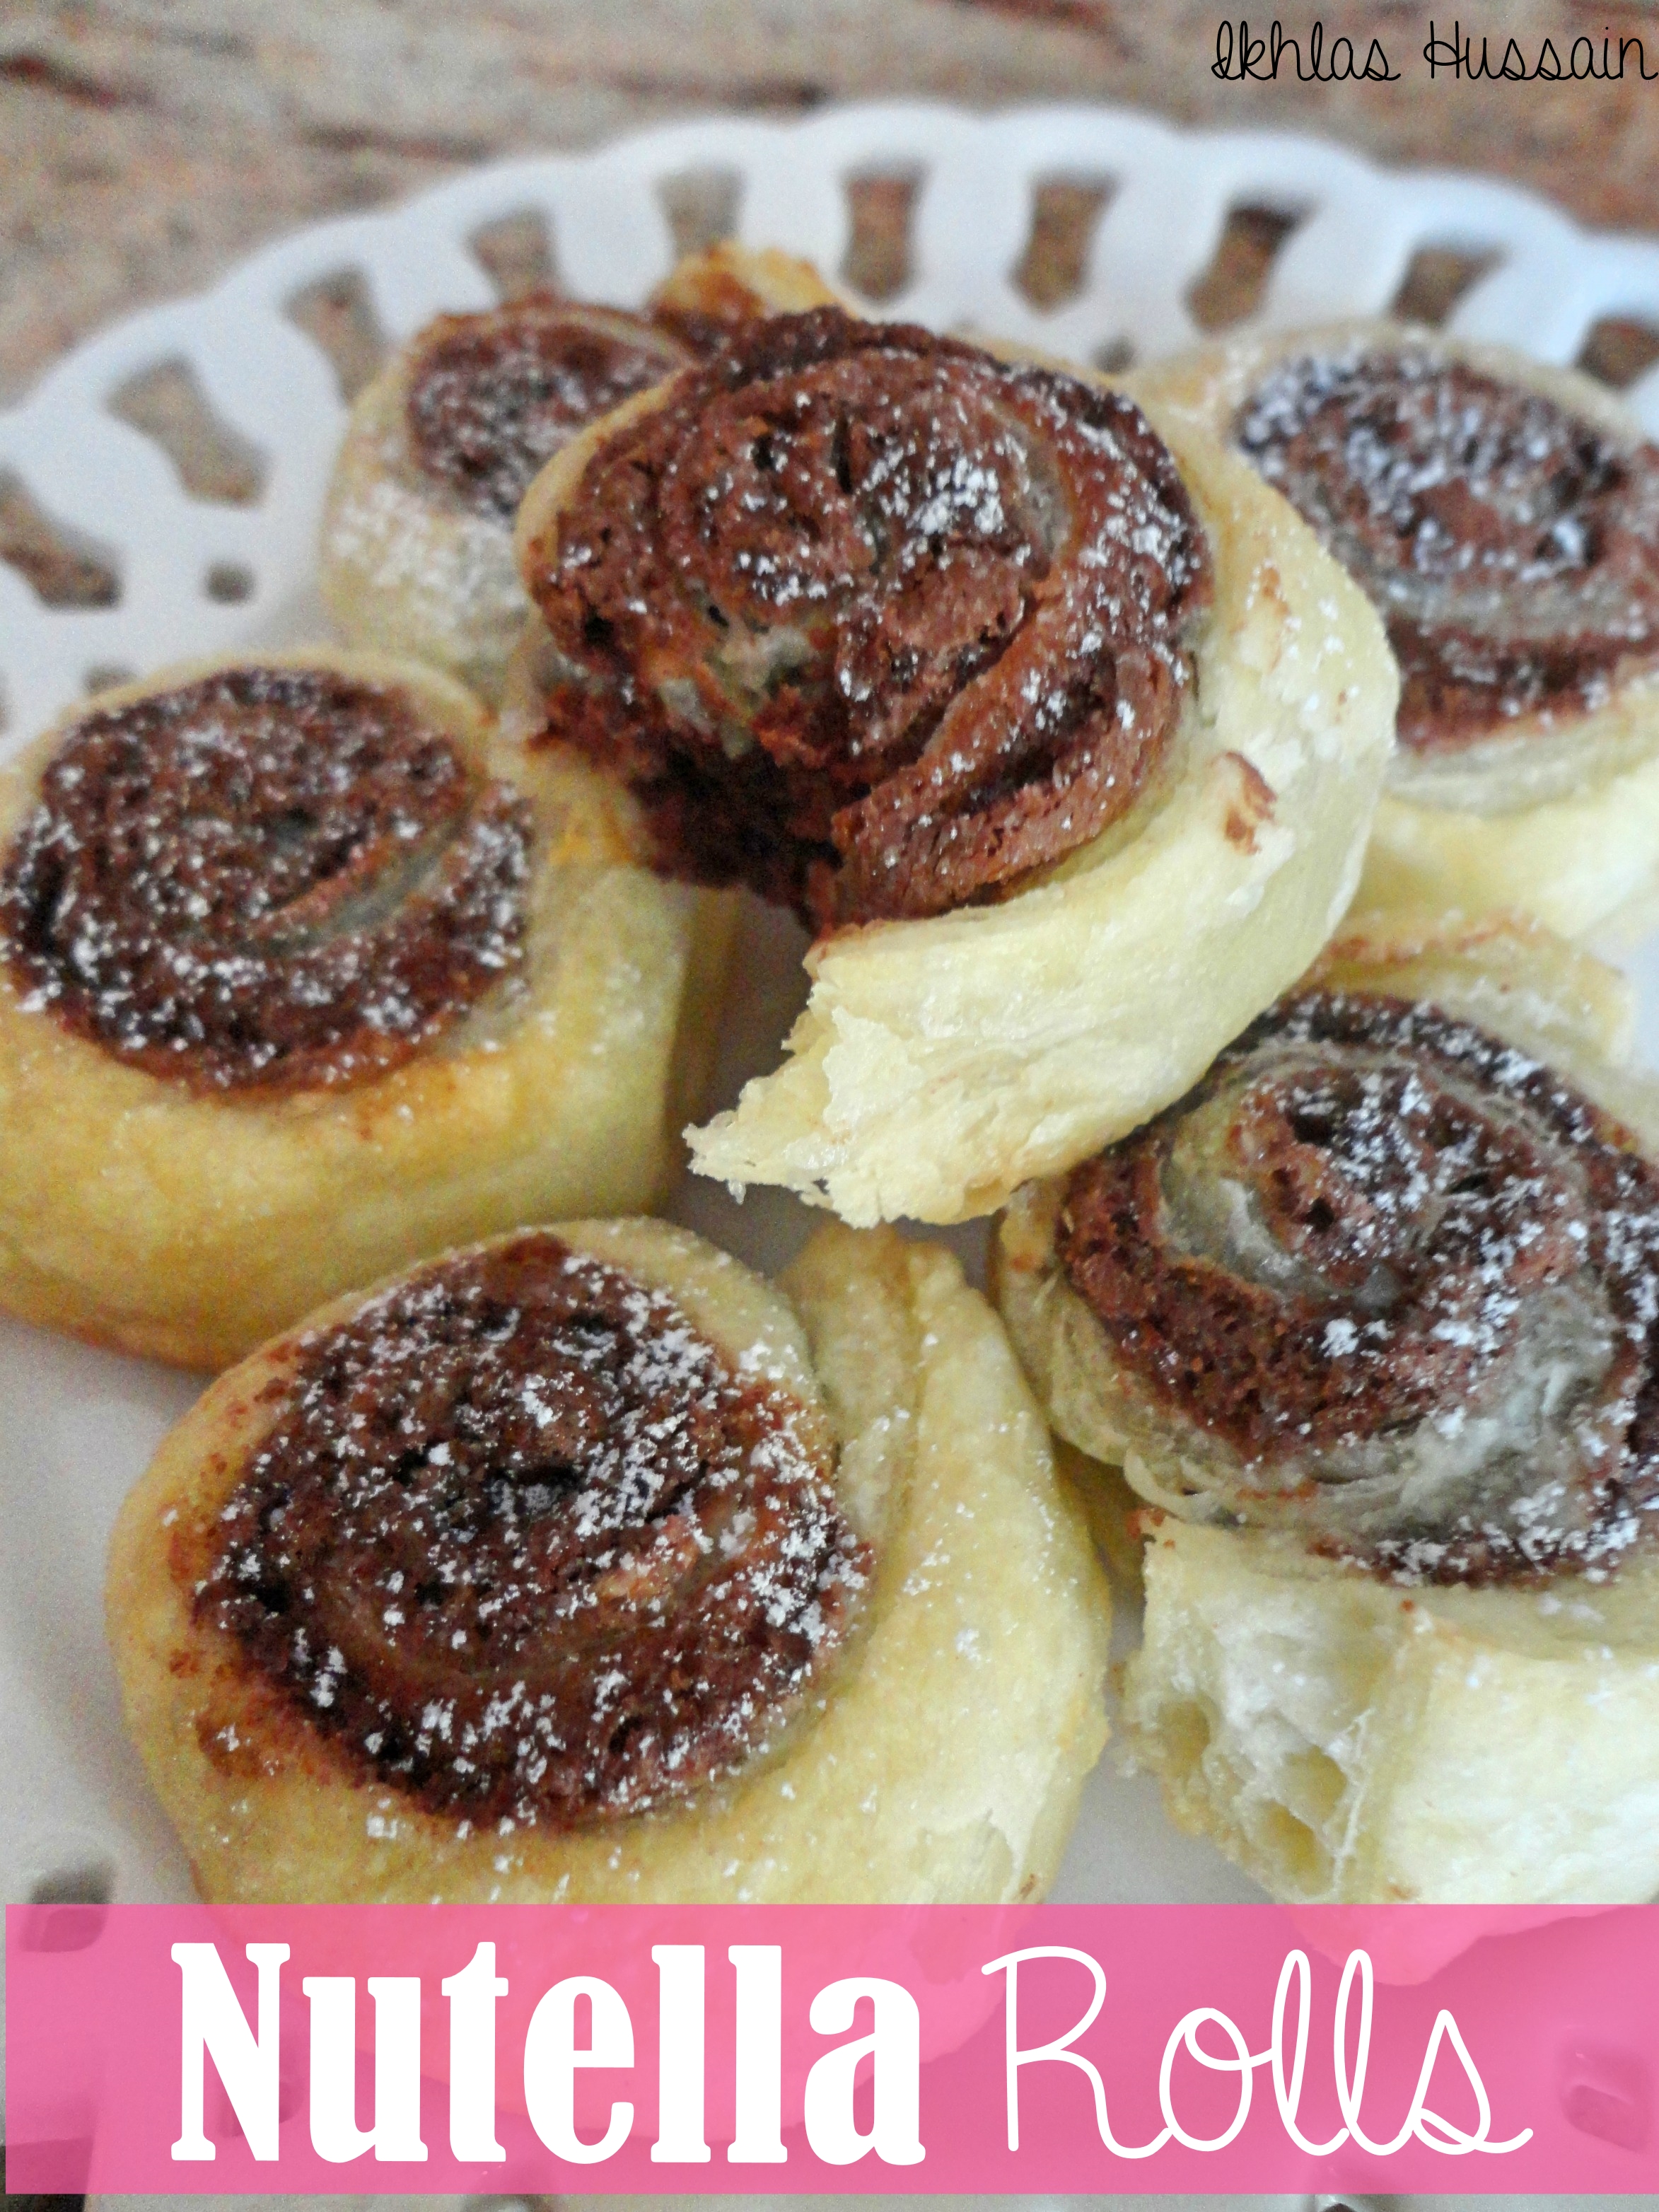 Nutella Rolls - The Whimsical Whims of Ikhlas Hussain